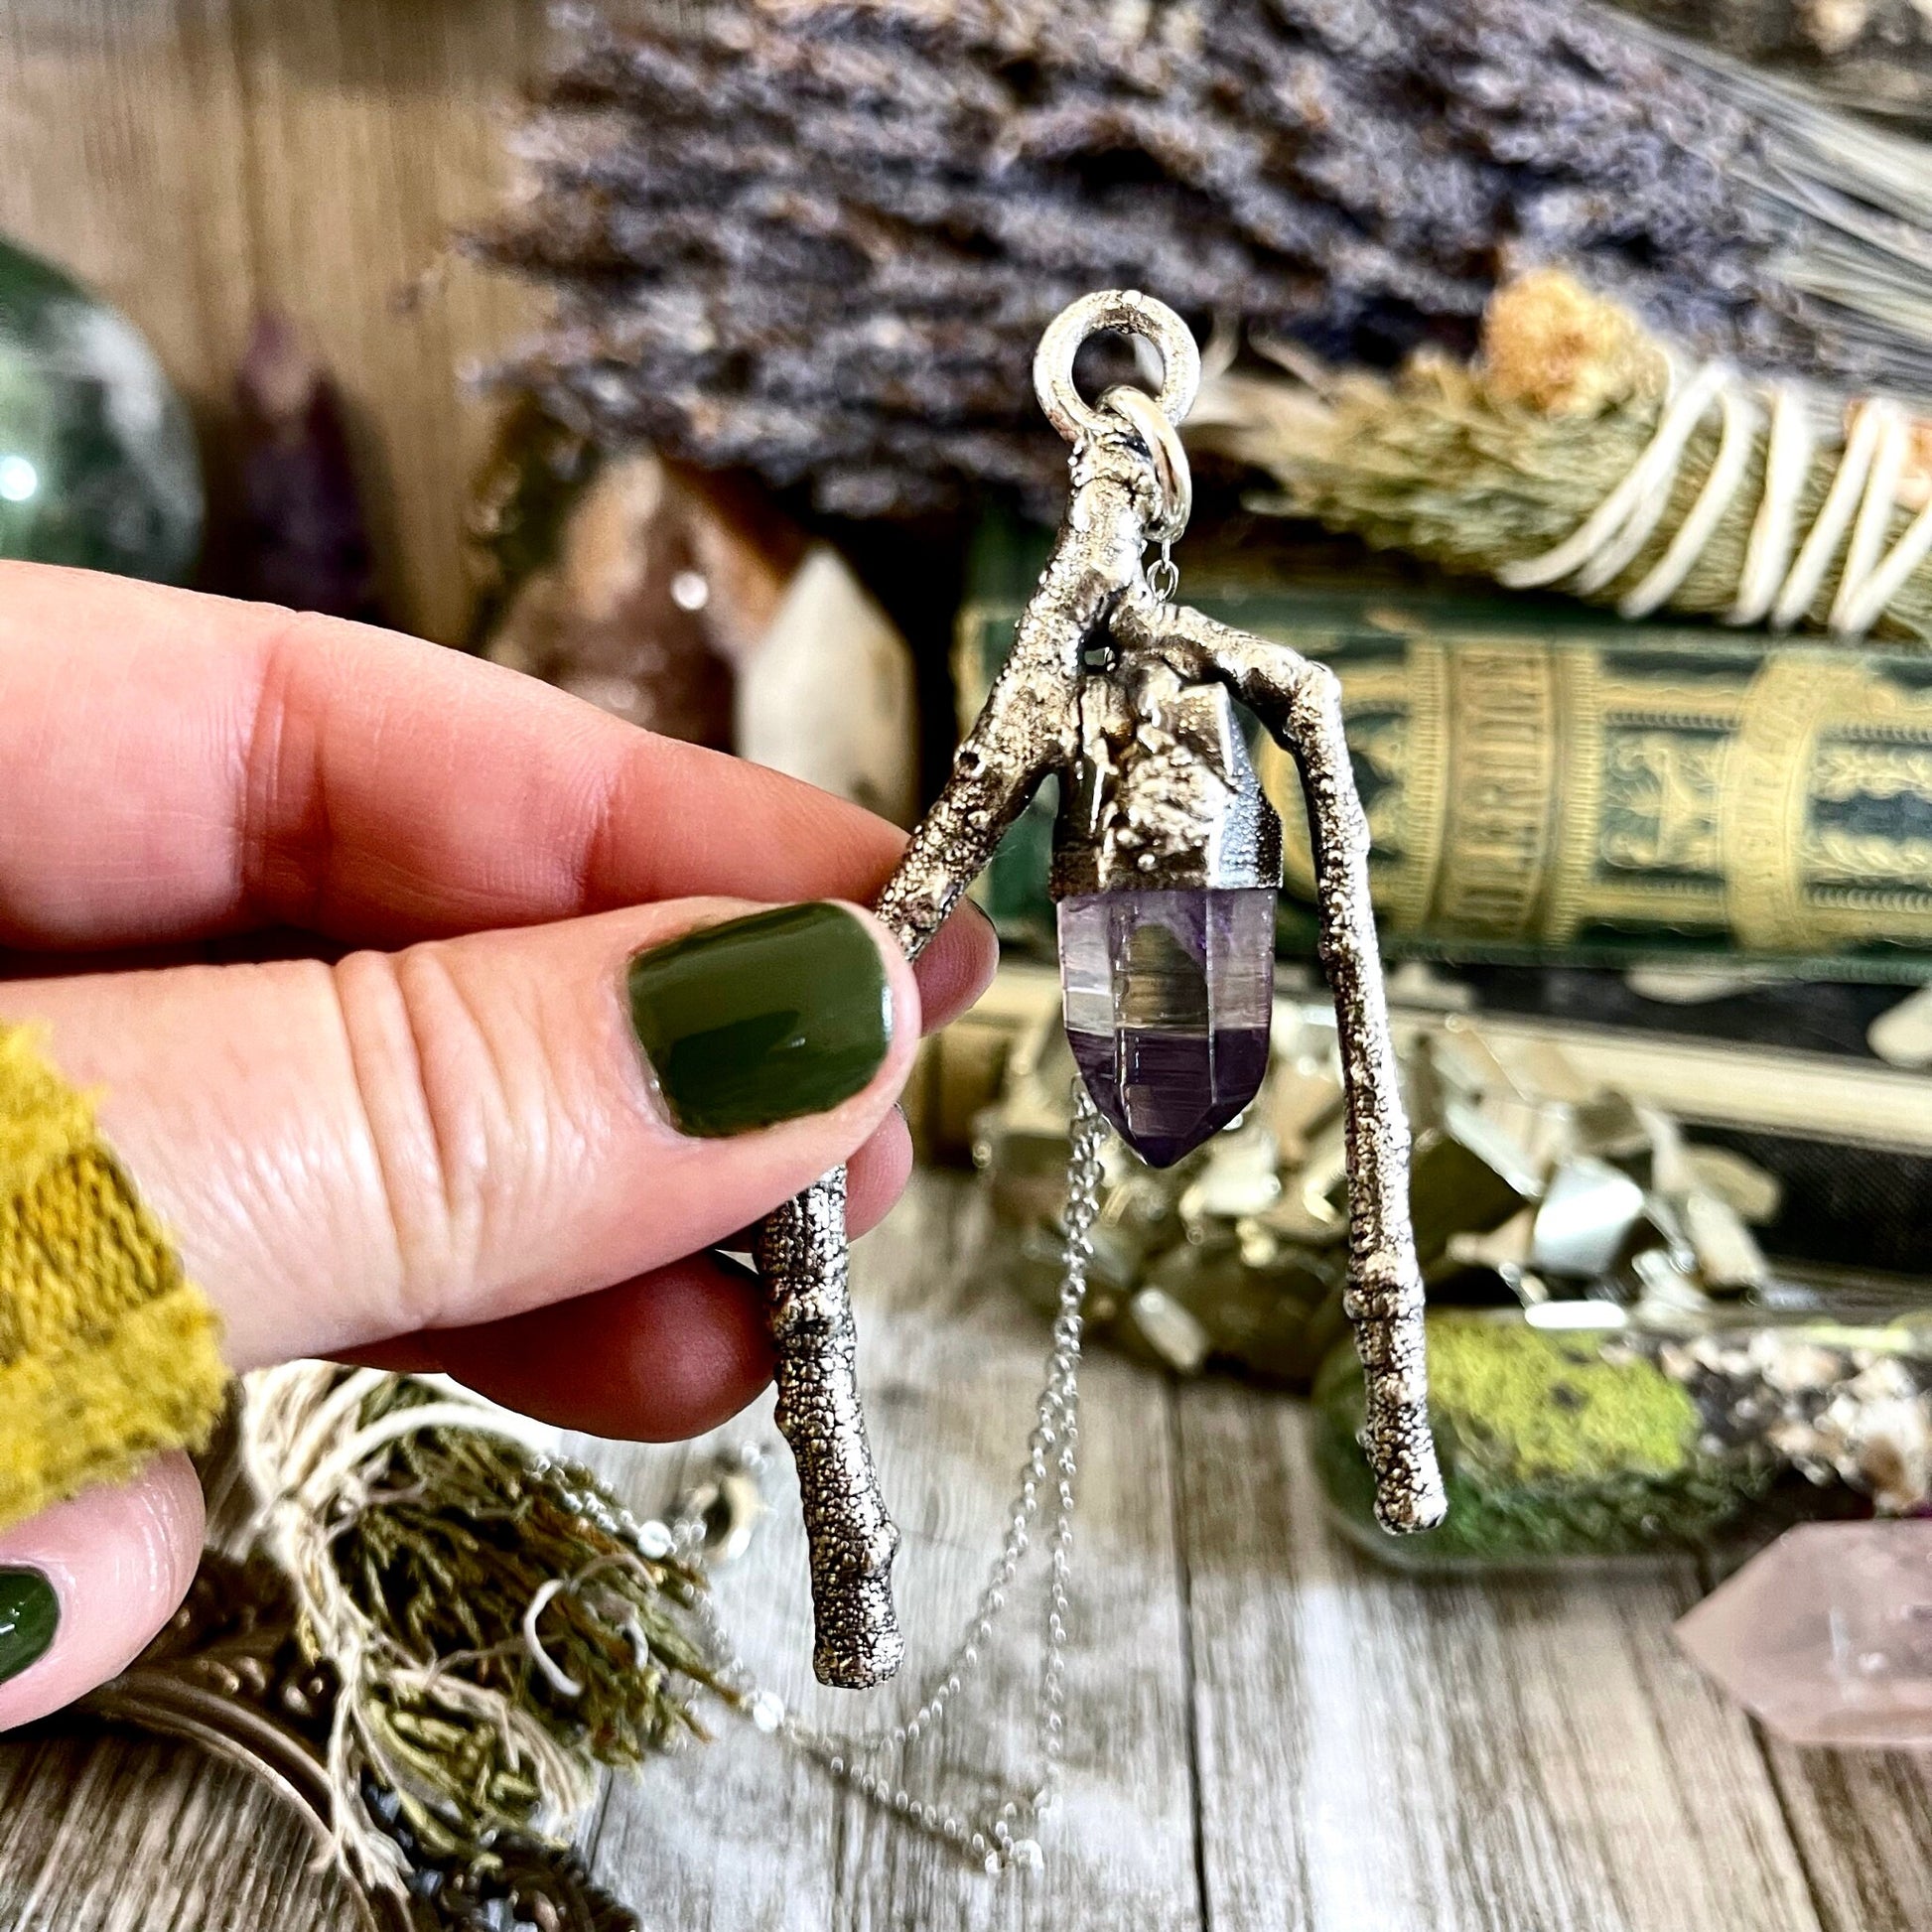 big crystal Necklace, Big Gothic Necklace, Bohemian Jewelry, Crystal Necklaces, Crystal Pendant, Etsy ID: 1620640184, FOXLARK- NECKLACES, Jewelry, nature inspired, Necklaces, Silver Jewelry, Silver Necklace, Silver Stone Jewelry, Statement Necklace, Stone